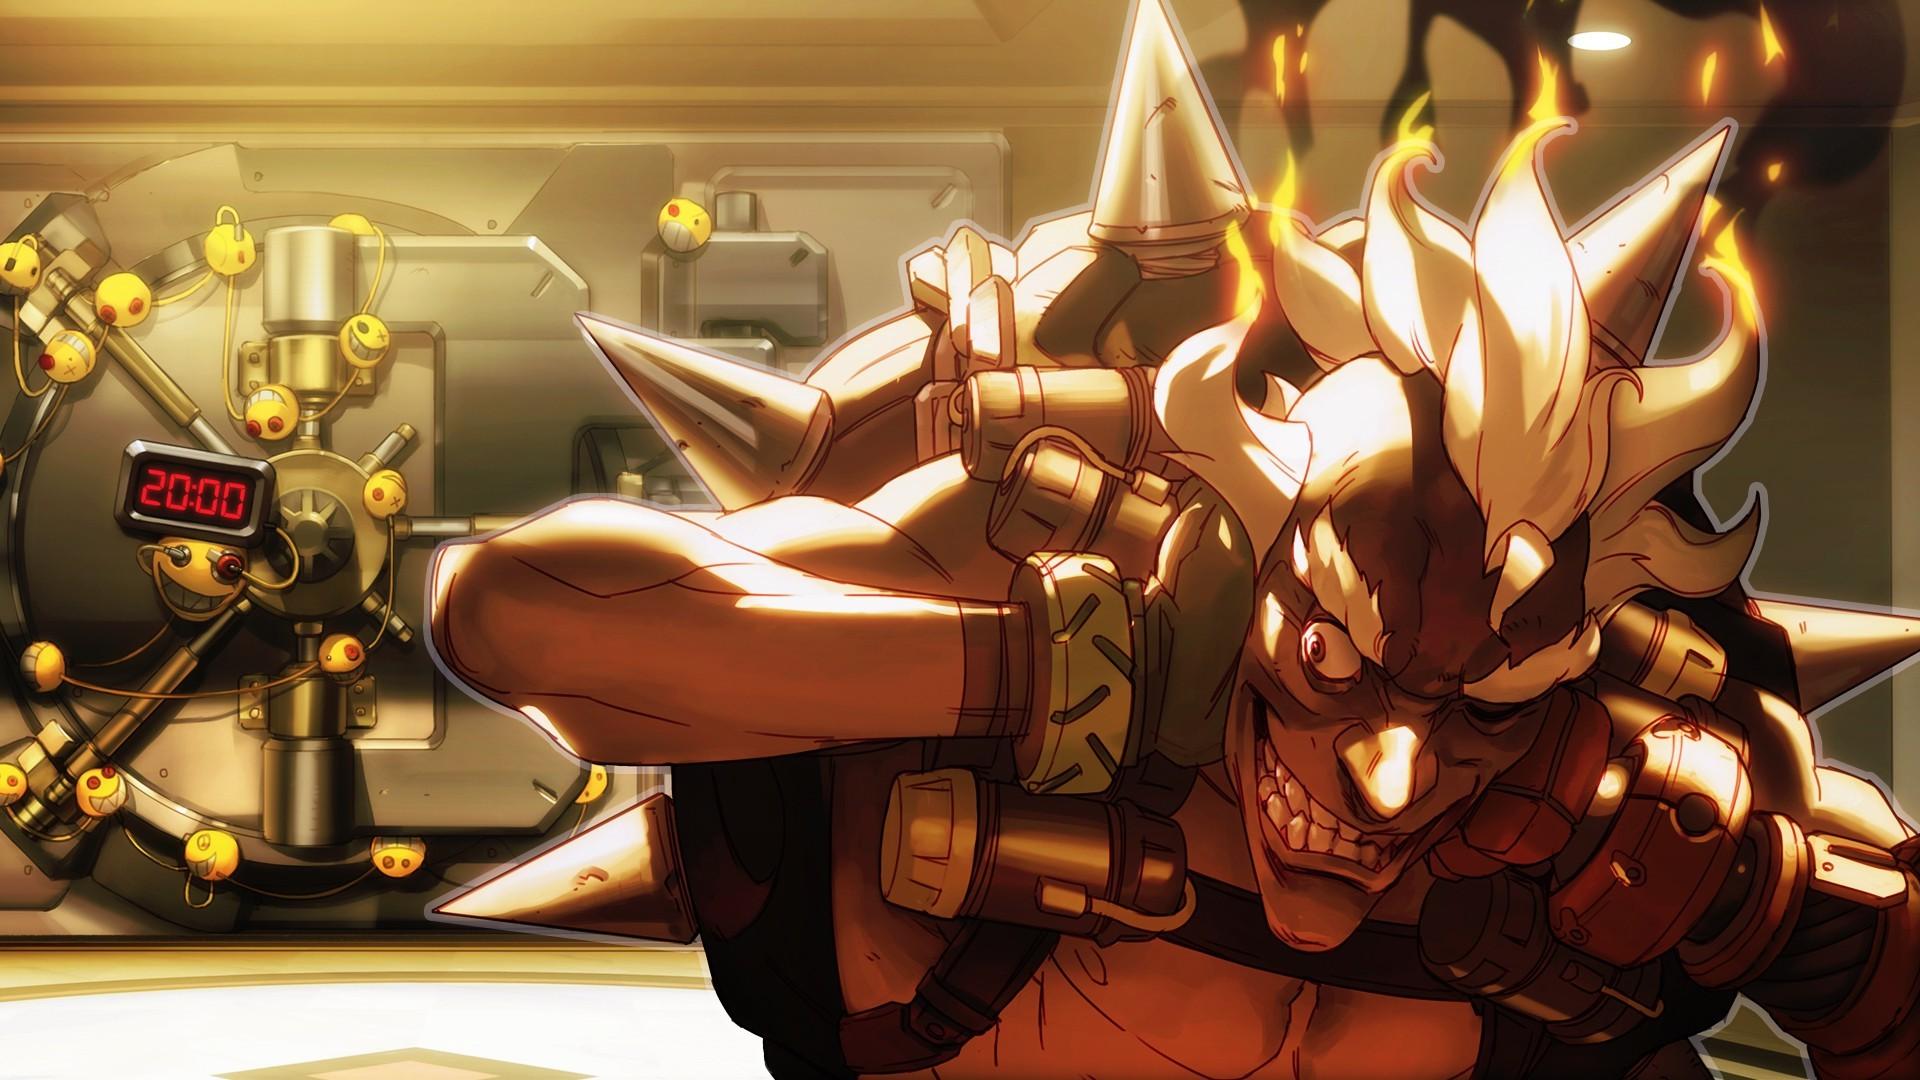 livewirehd (Author), Junkrat, Jamison Fawkes, Blizzard Entertainment, Overwatch, Video Games Wallpaper HD / Desktop and Mobile Background